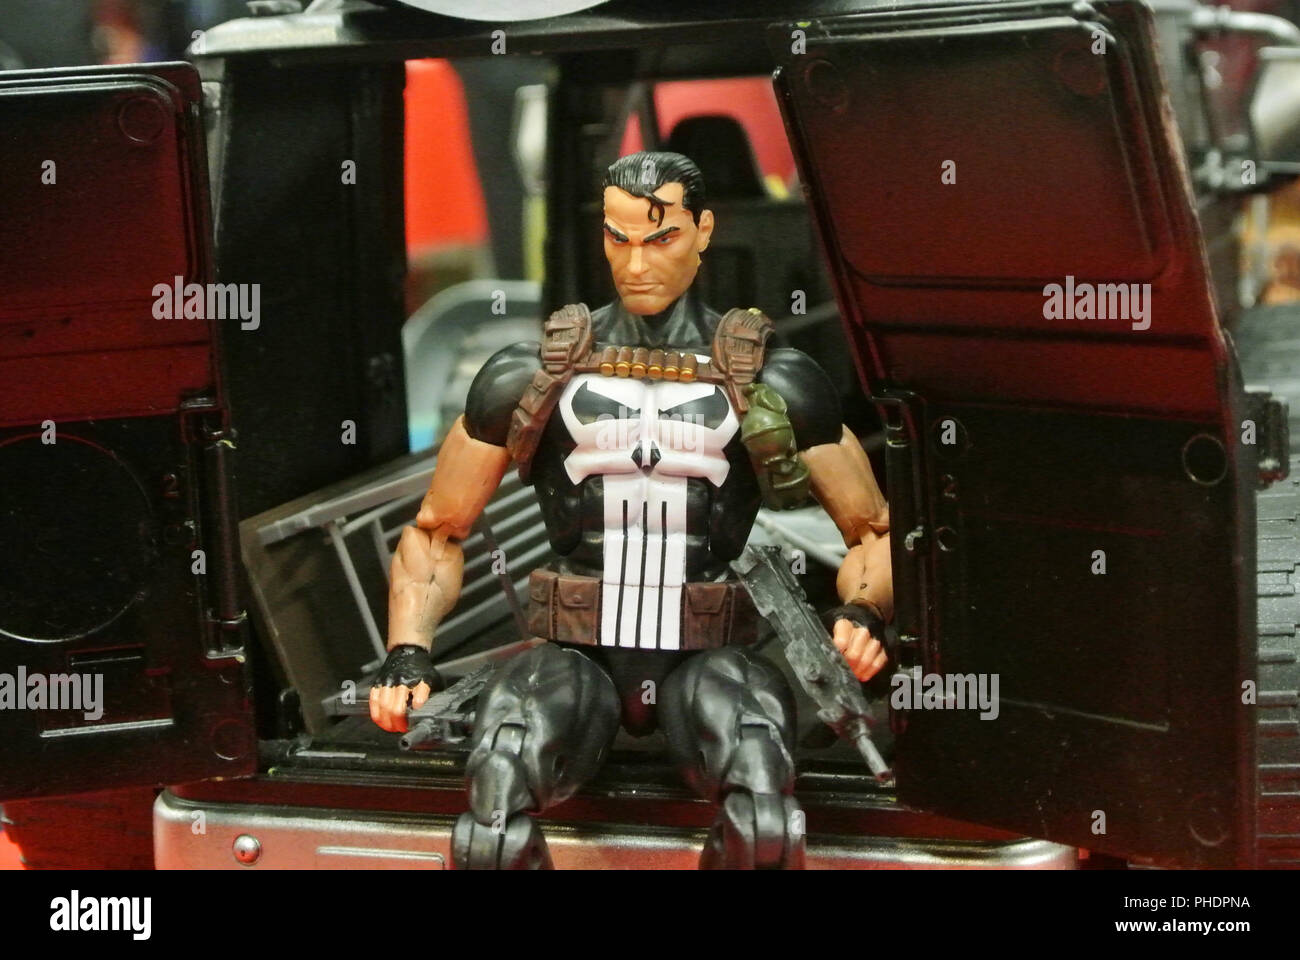 Fiction character of PUNISHER from MARVEL movies and comic. PUNISHER action figure toys in various size display for the public. Stock Photo